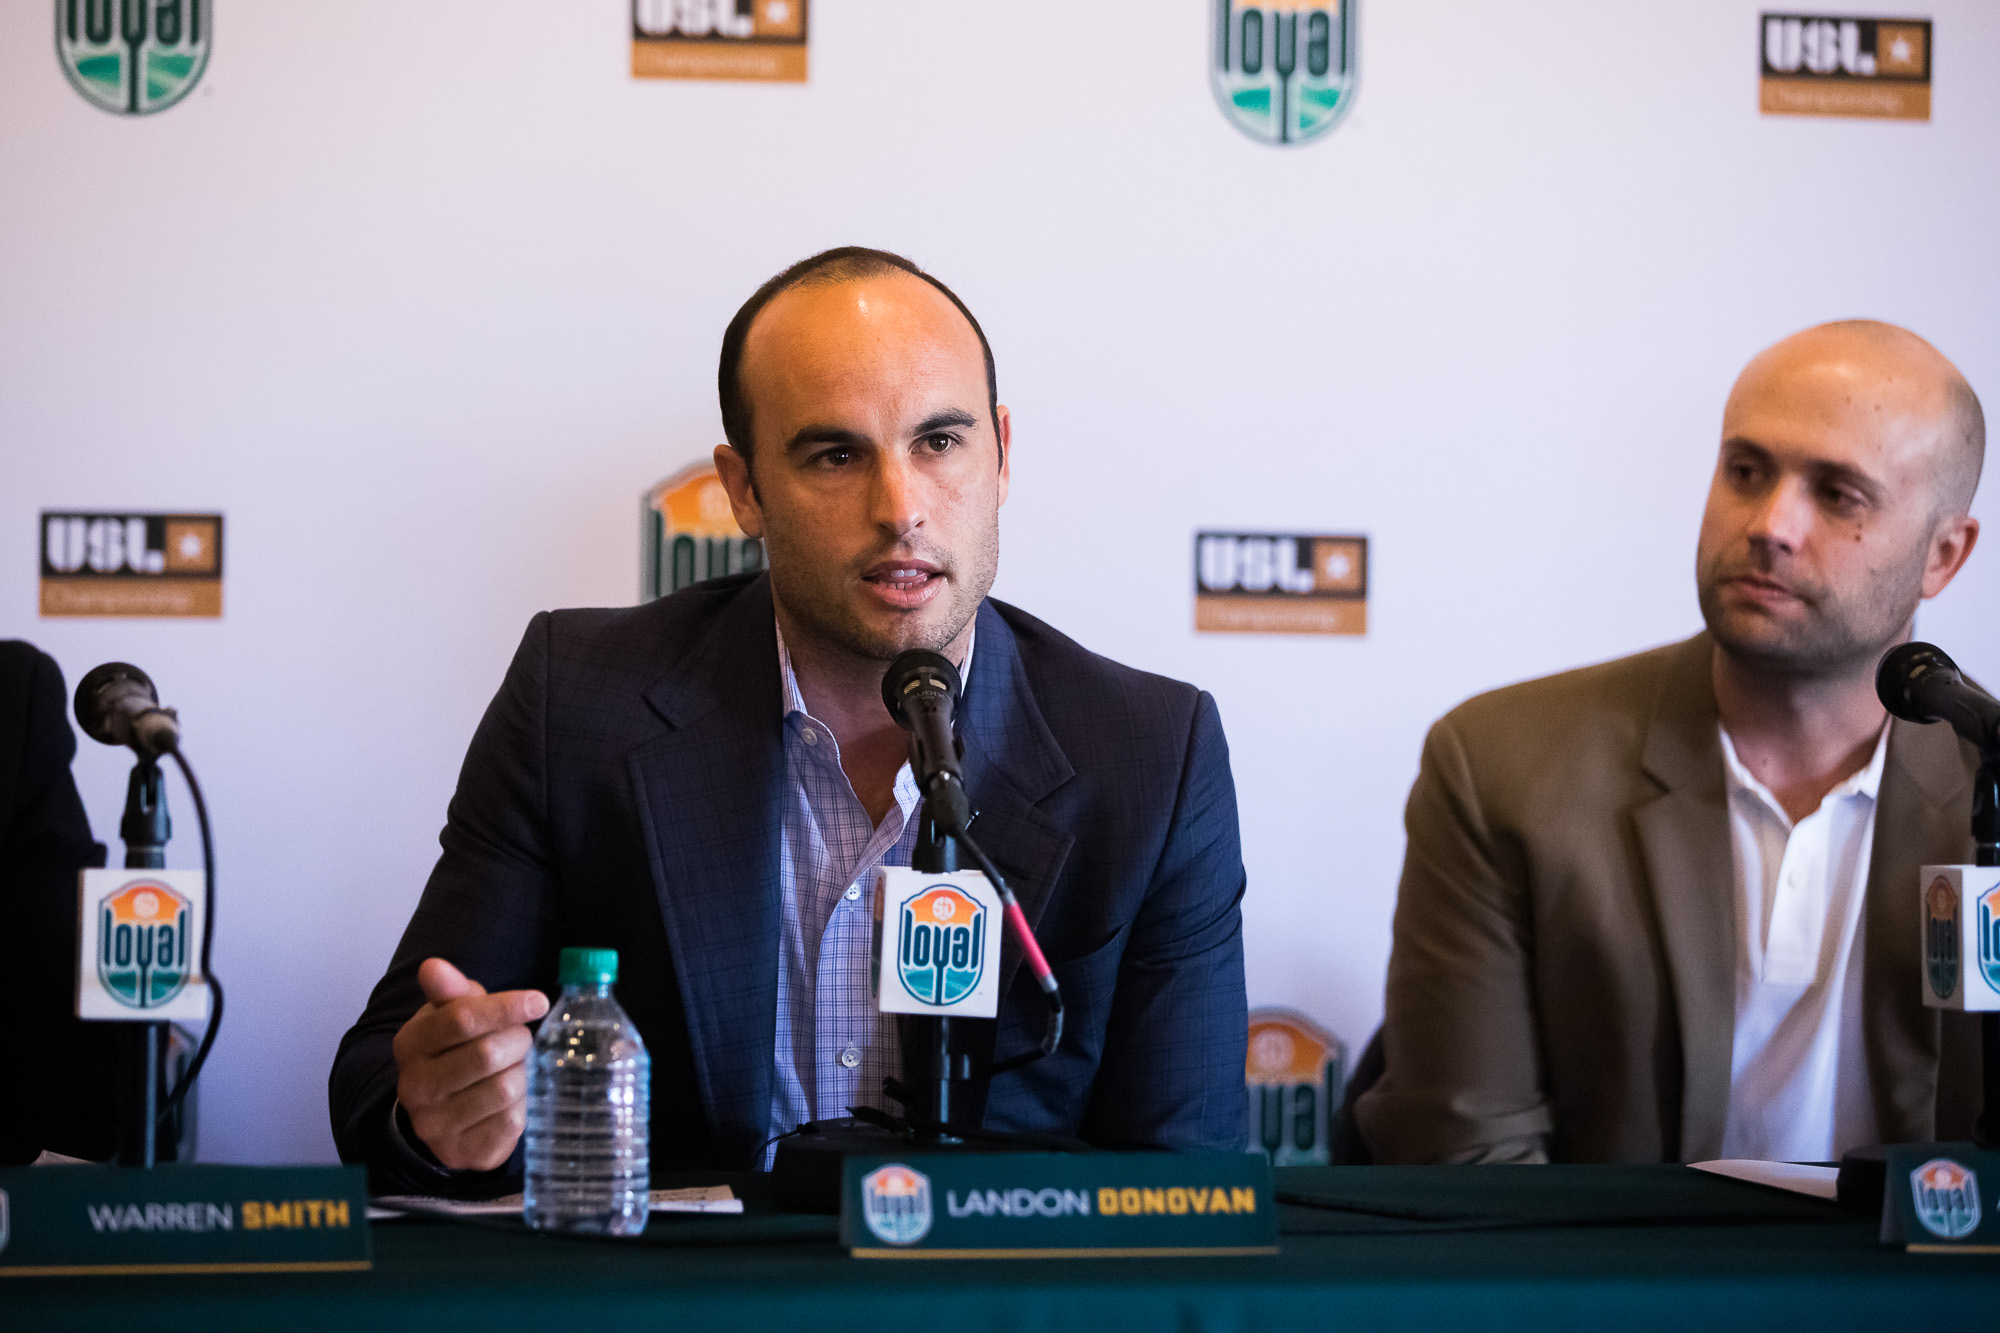 Landon Donovan: Getting Cut from the 2014 roster was “much more valuable than going to a World Cup.”